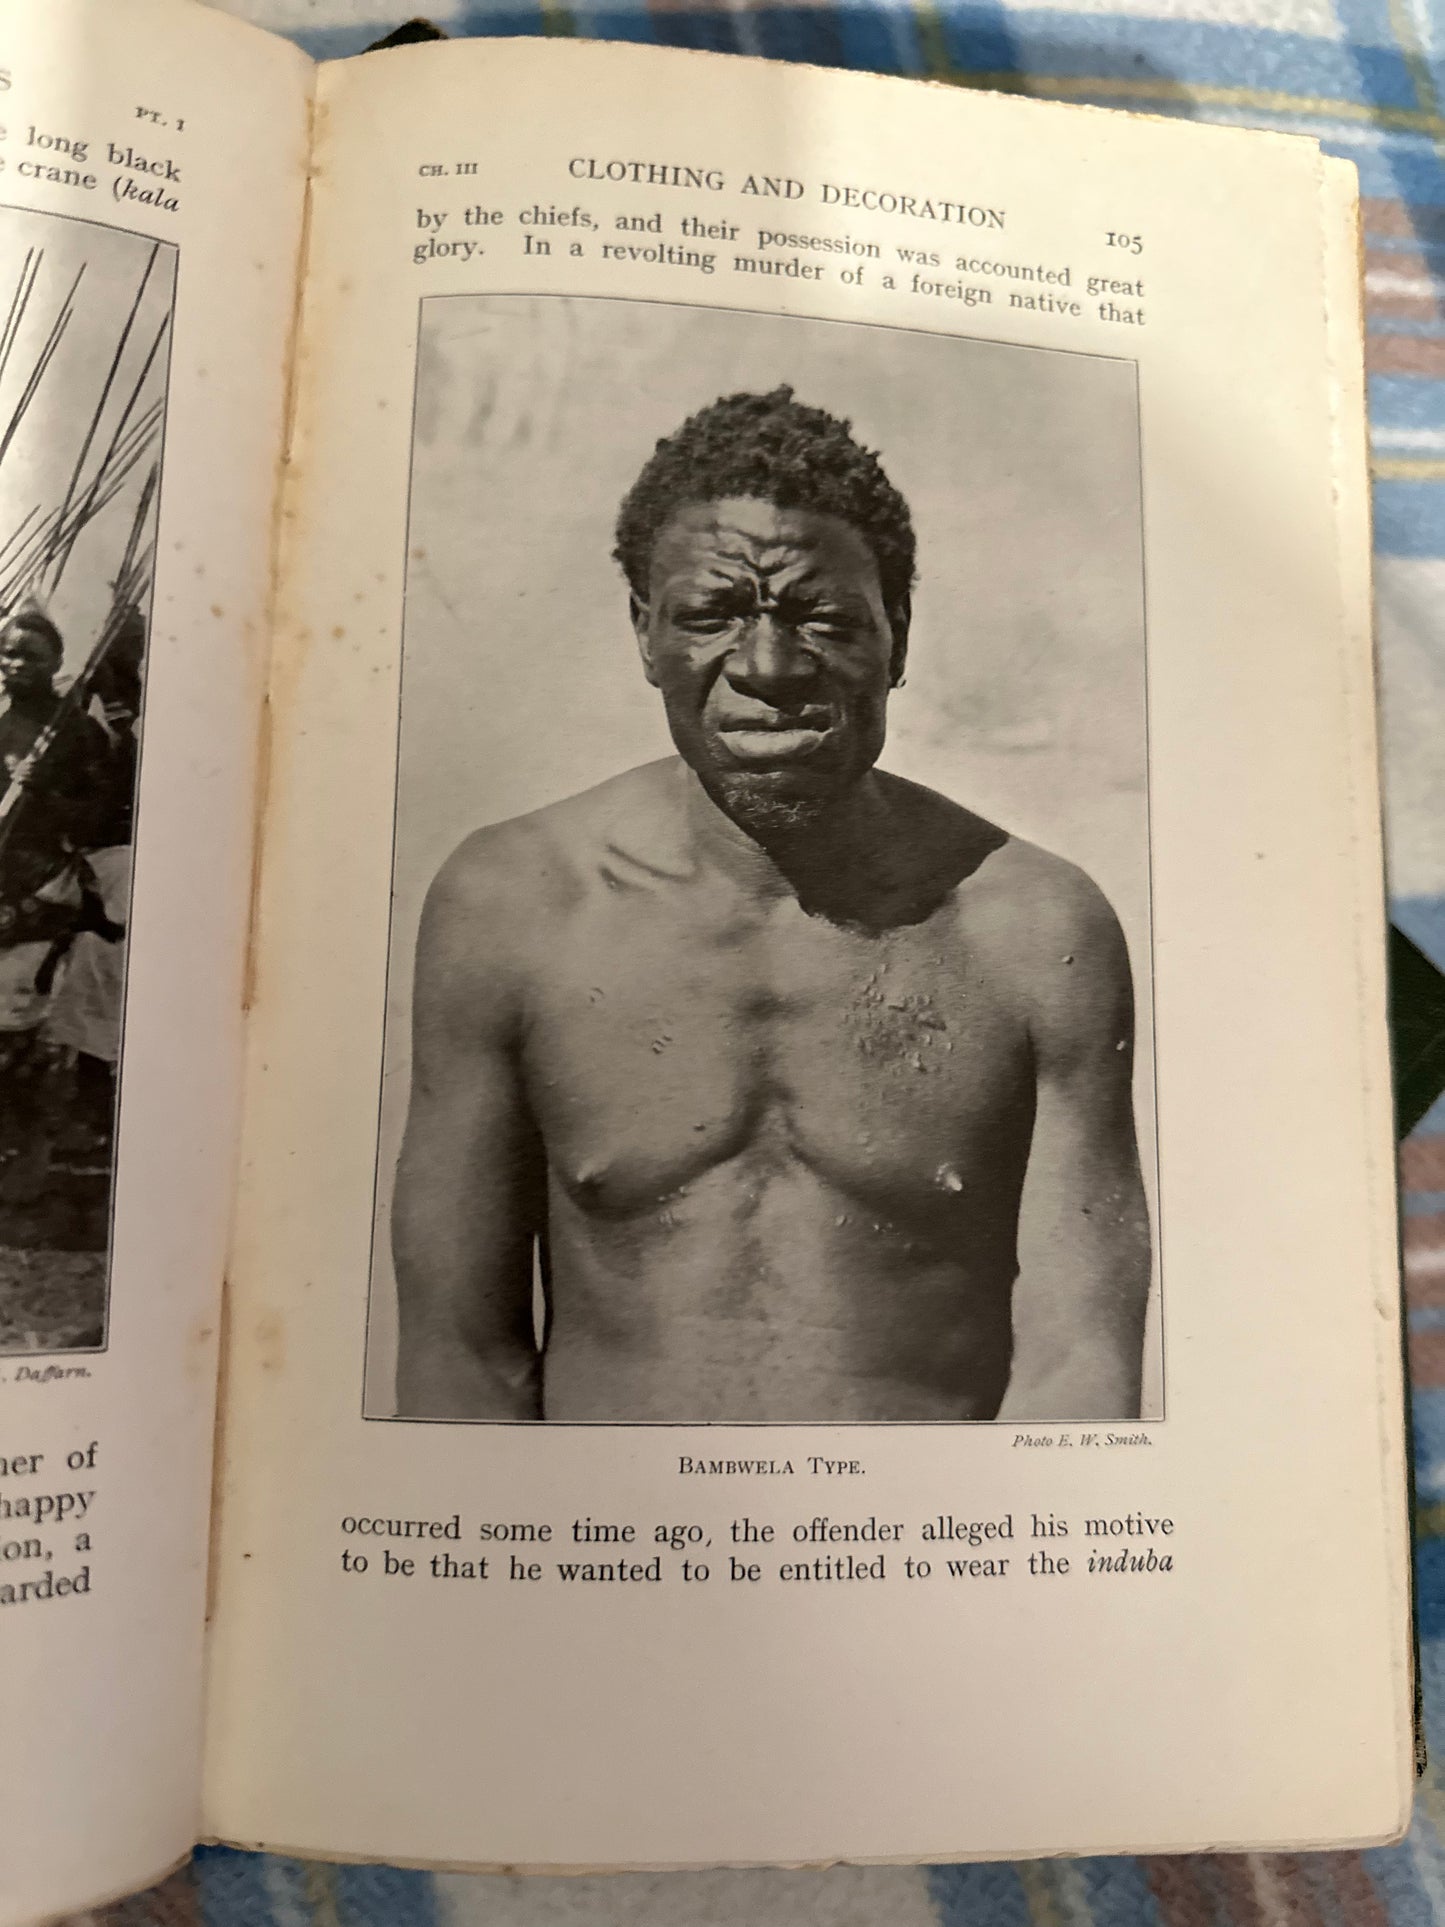 1920 The ILA-Speaking Peoples of Northern Rhodesia (Vols 1-2) Rev Edwin W. Smith & Captain Andrew Murray Dale (MacMillan & Co Ltd)